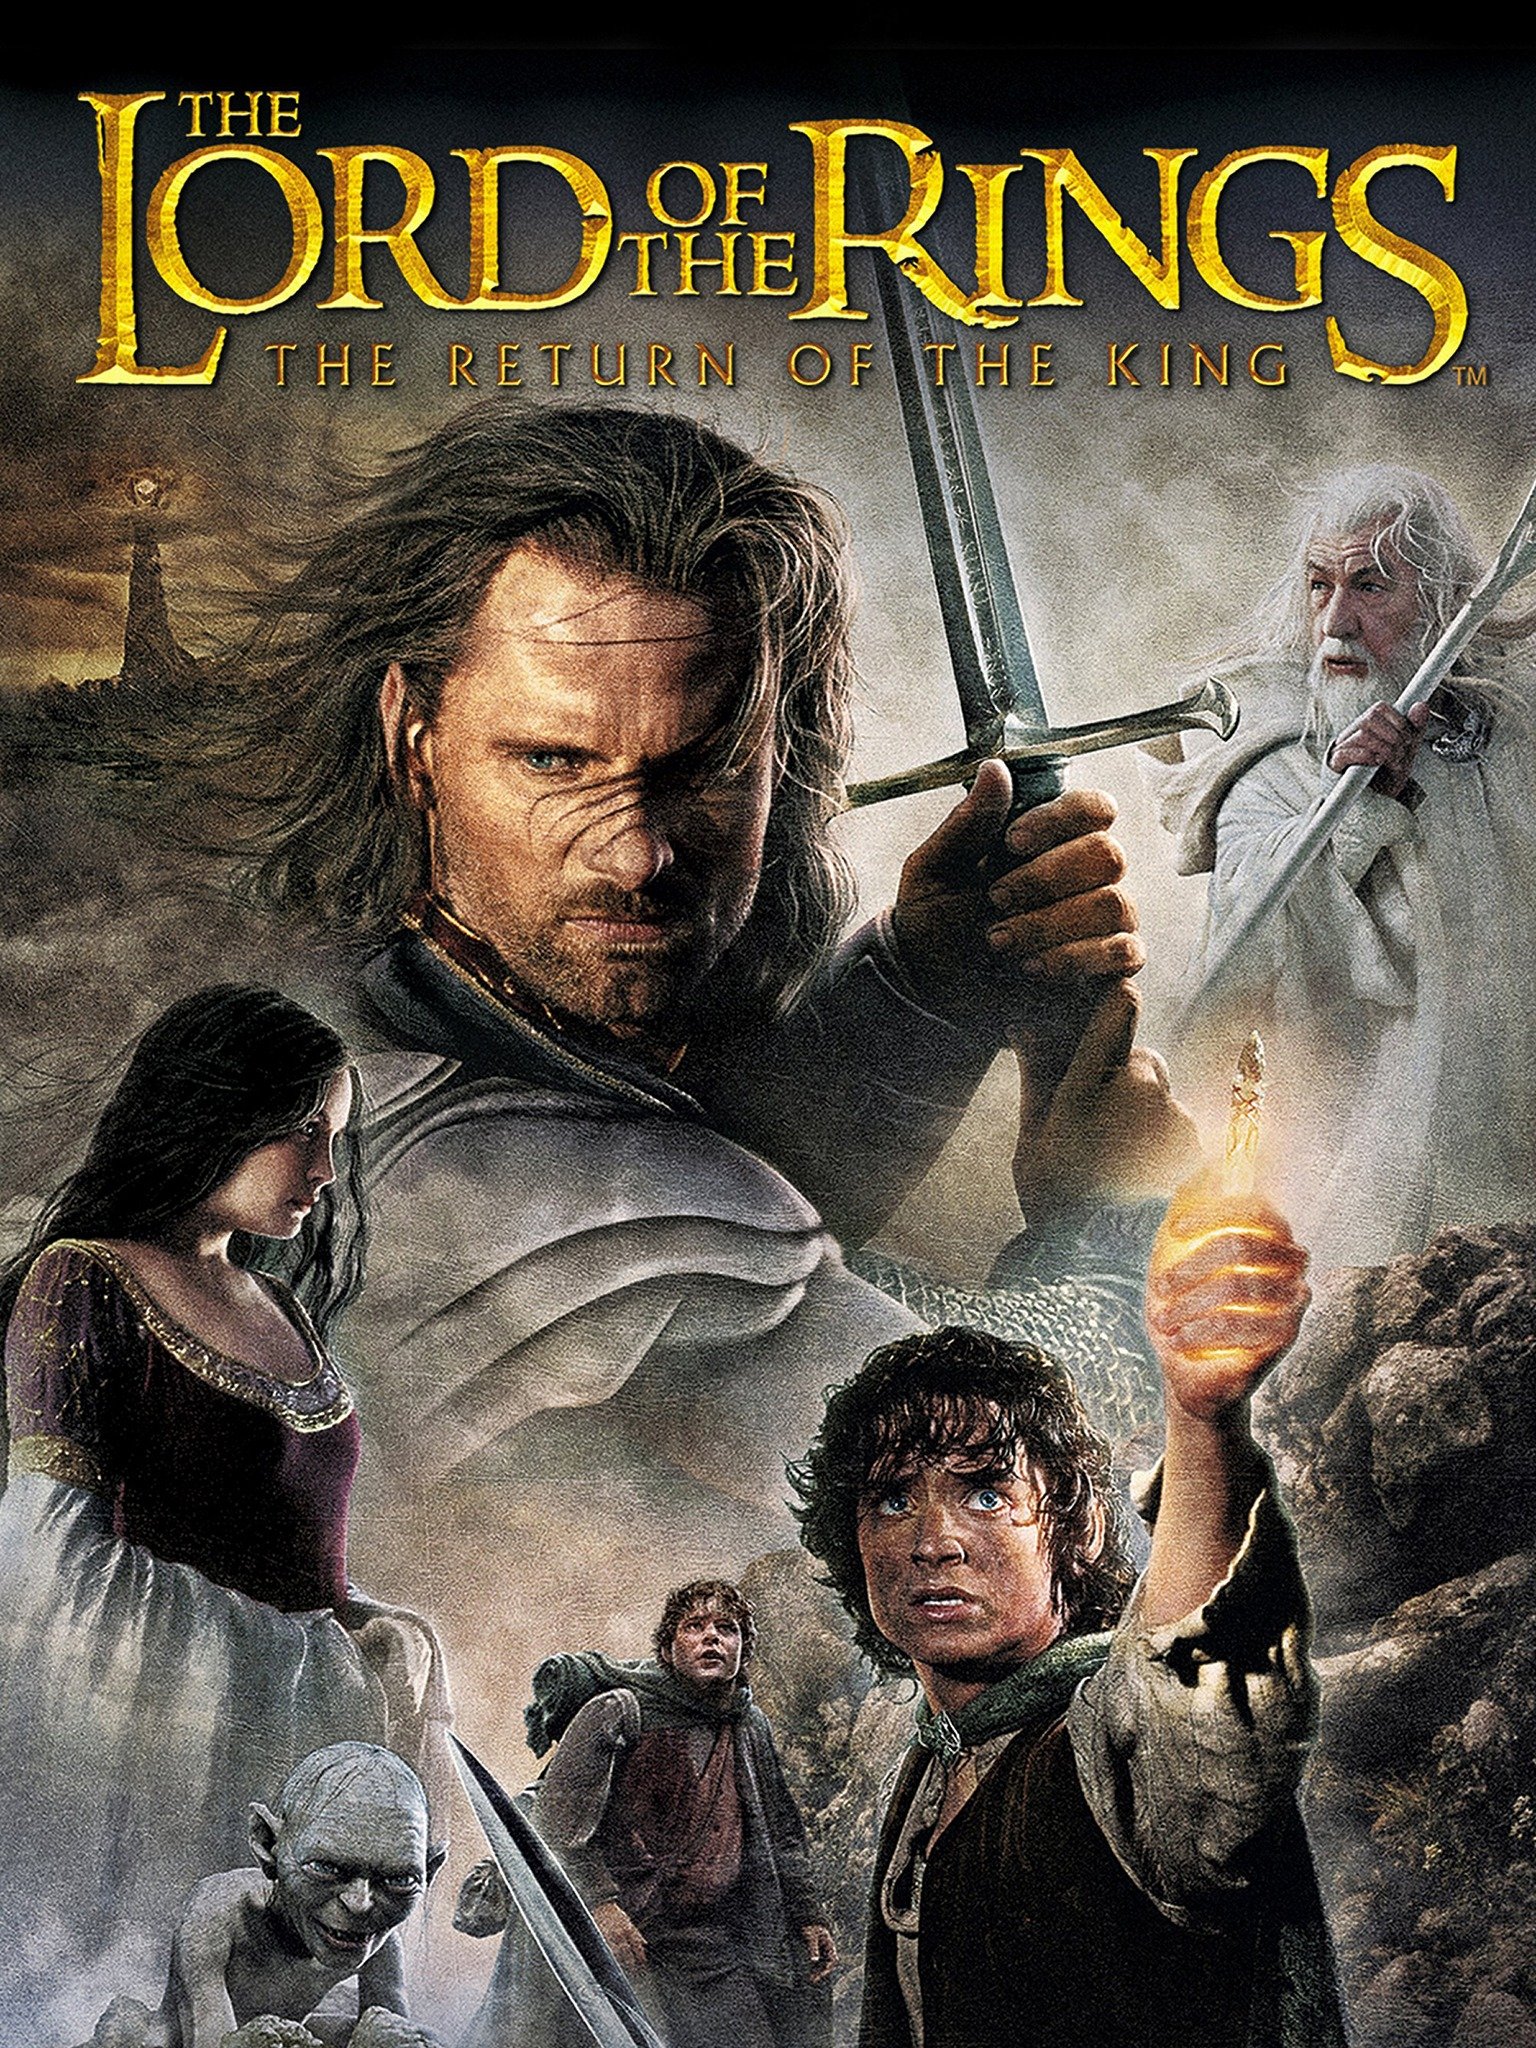 The Lord of the Rings 3 The Return of the King (2003) มหาสงครามชิงพิภพ Extended